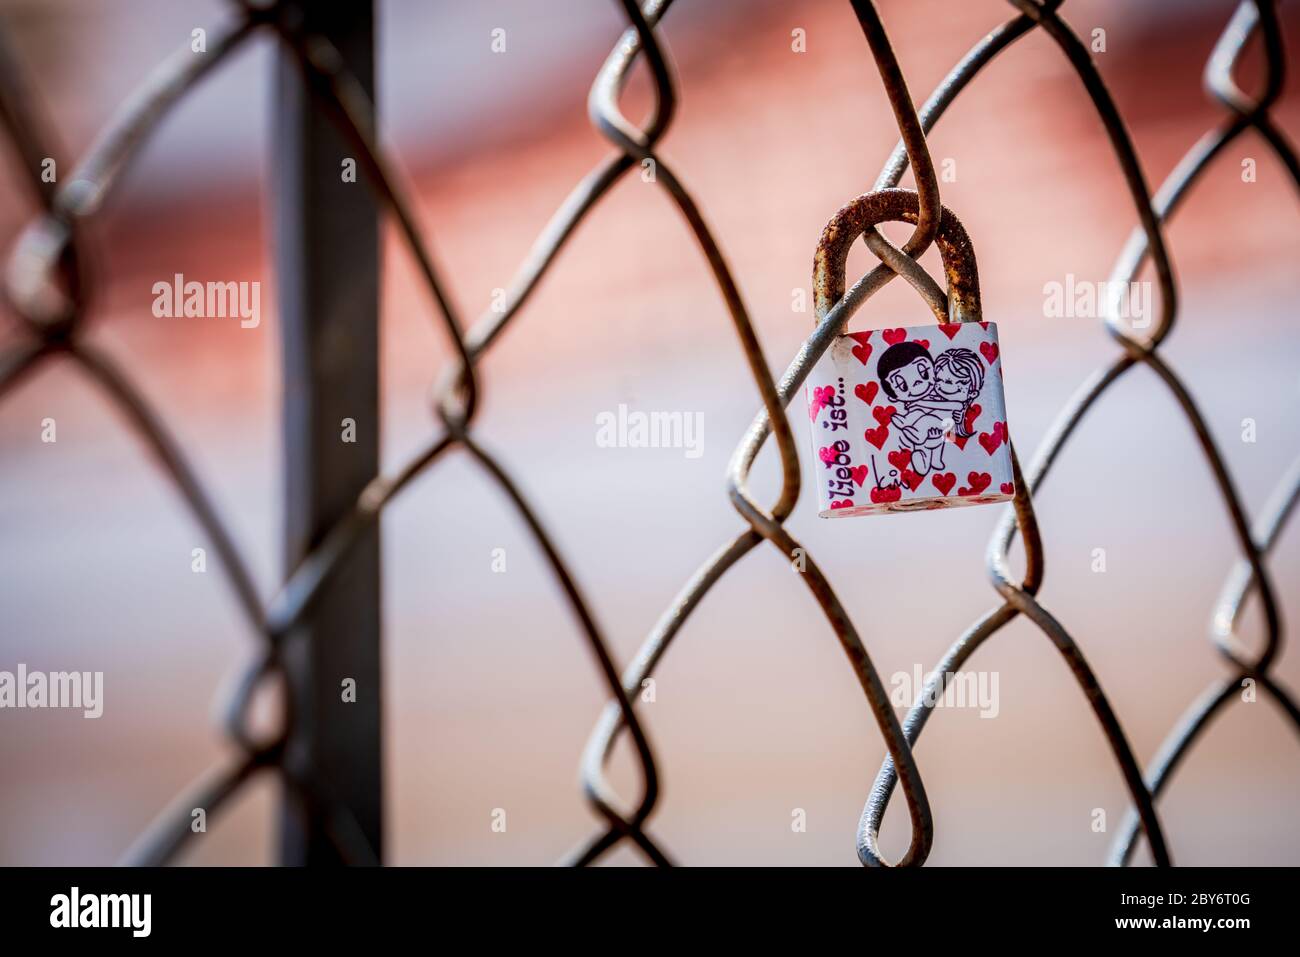 Single love lock locked to a wire fence covered in hearts and a cartoon couple in each other's arms. Photograph: Tony Taylor Stock Photo